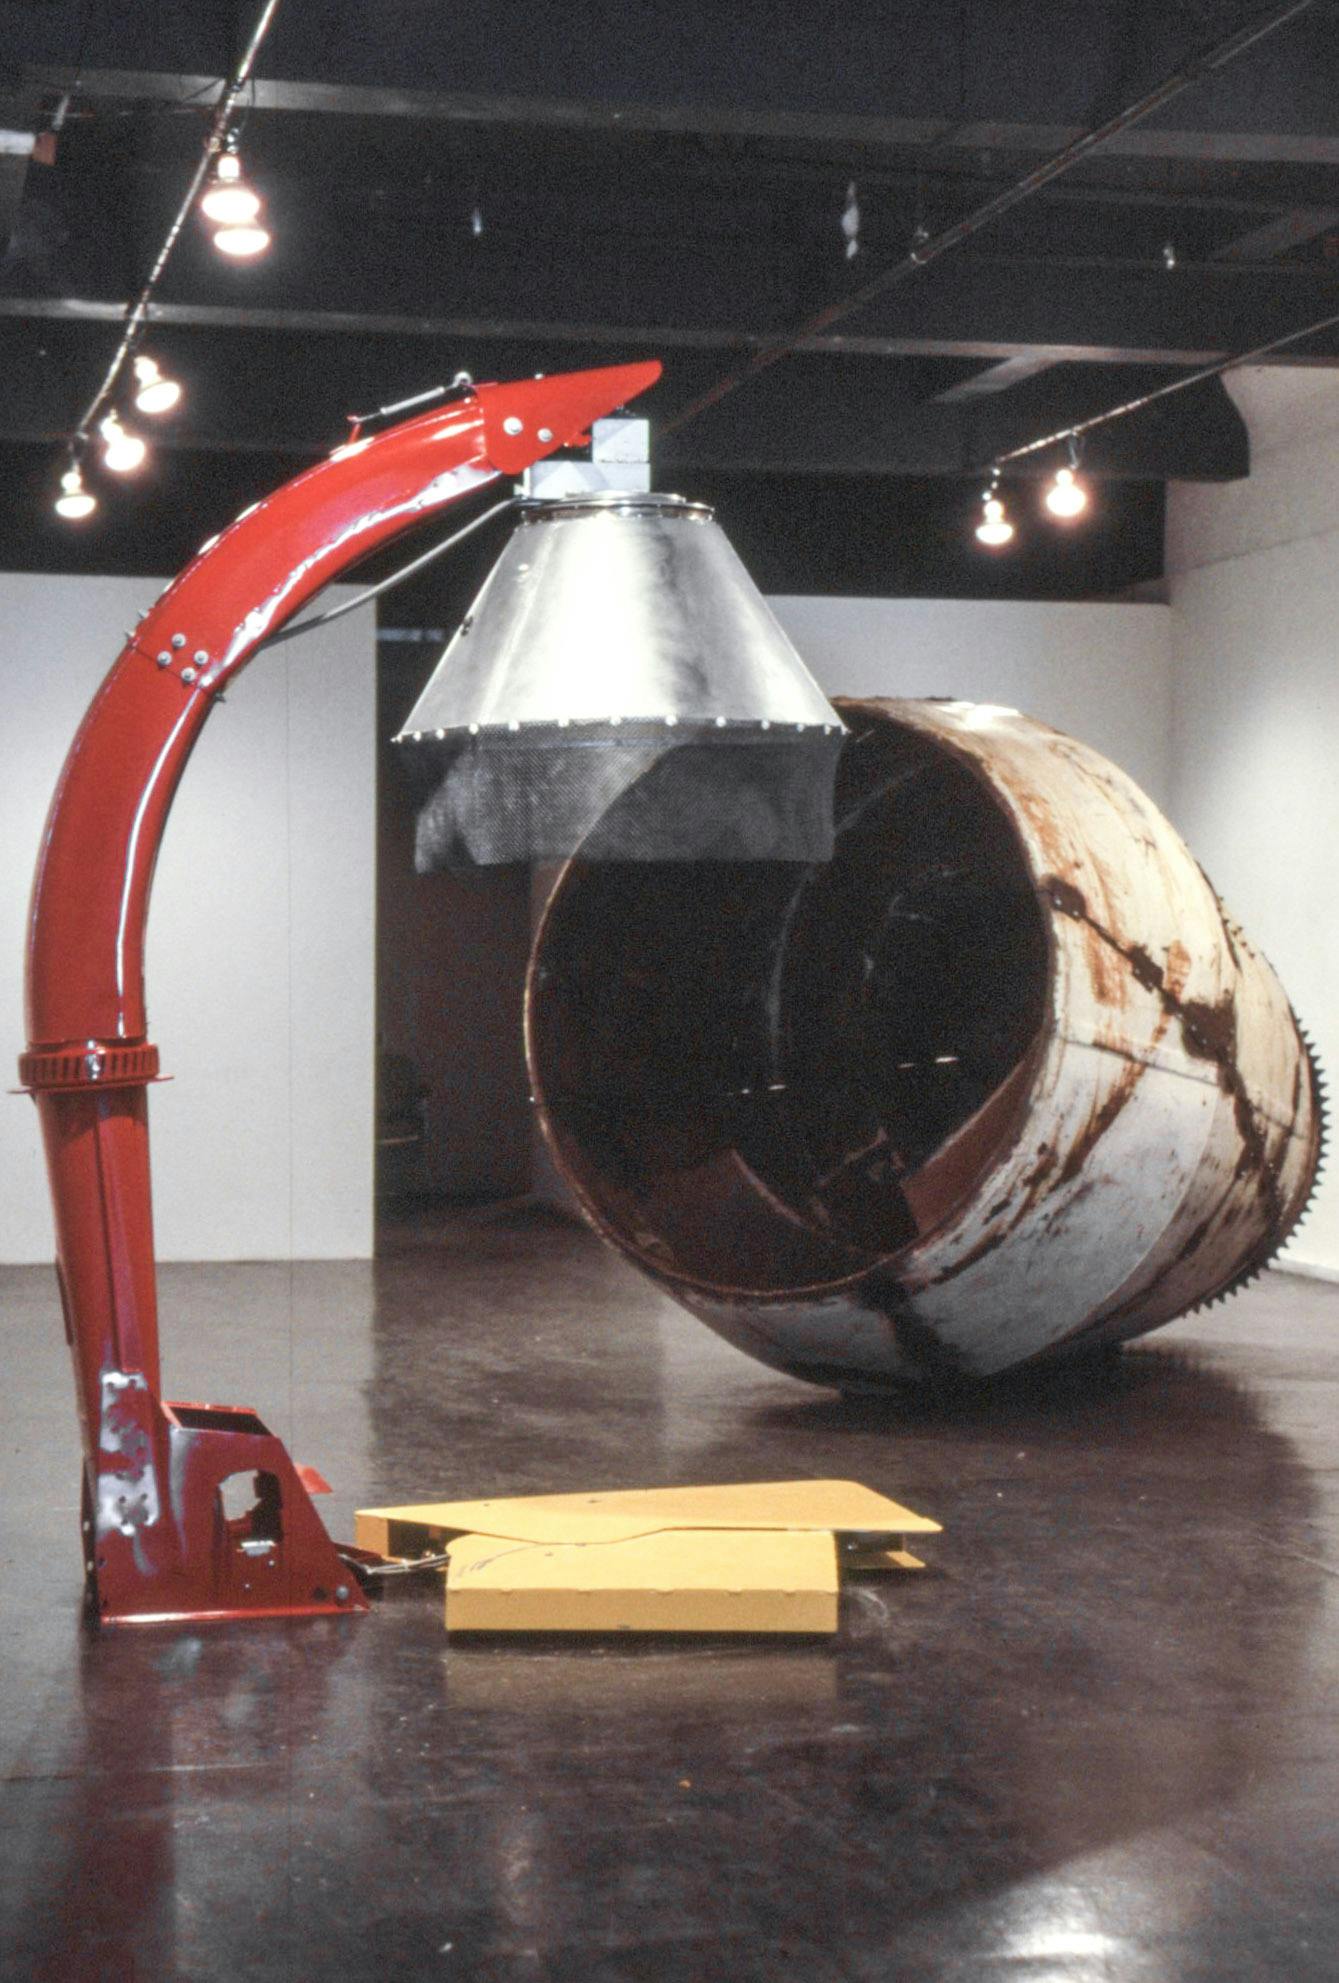 Two sculptures in a gallery space. The works are a large, rusty cement mixer and a bright red industrial silage spout.